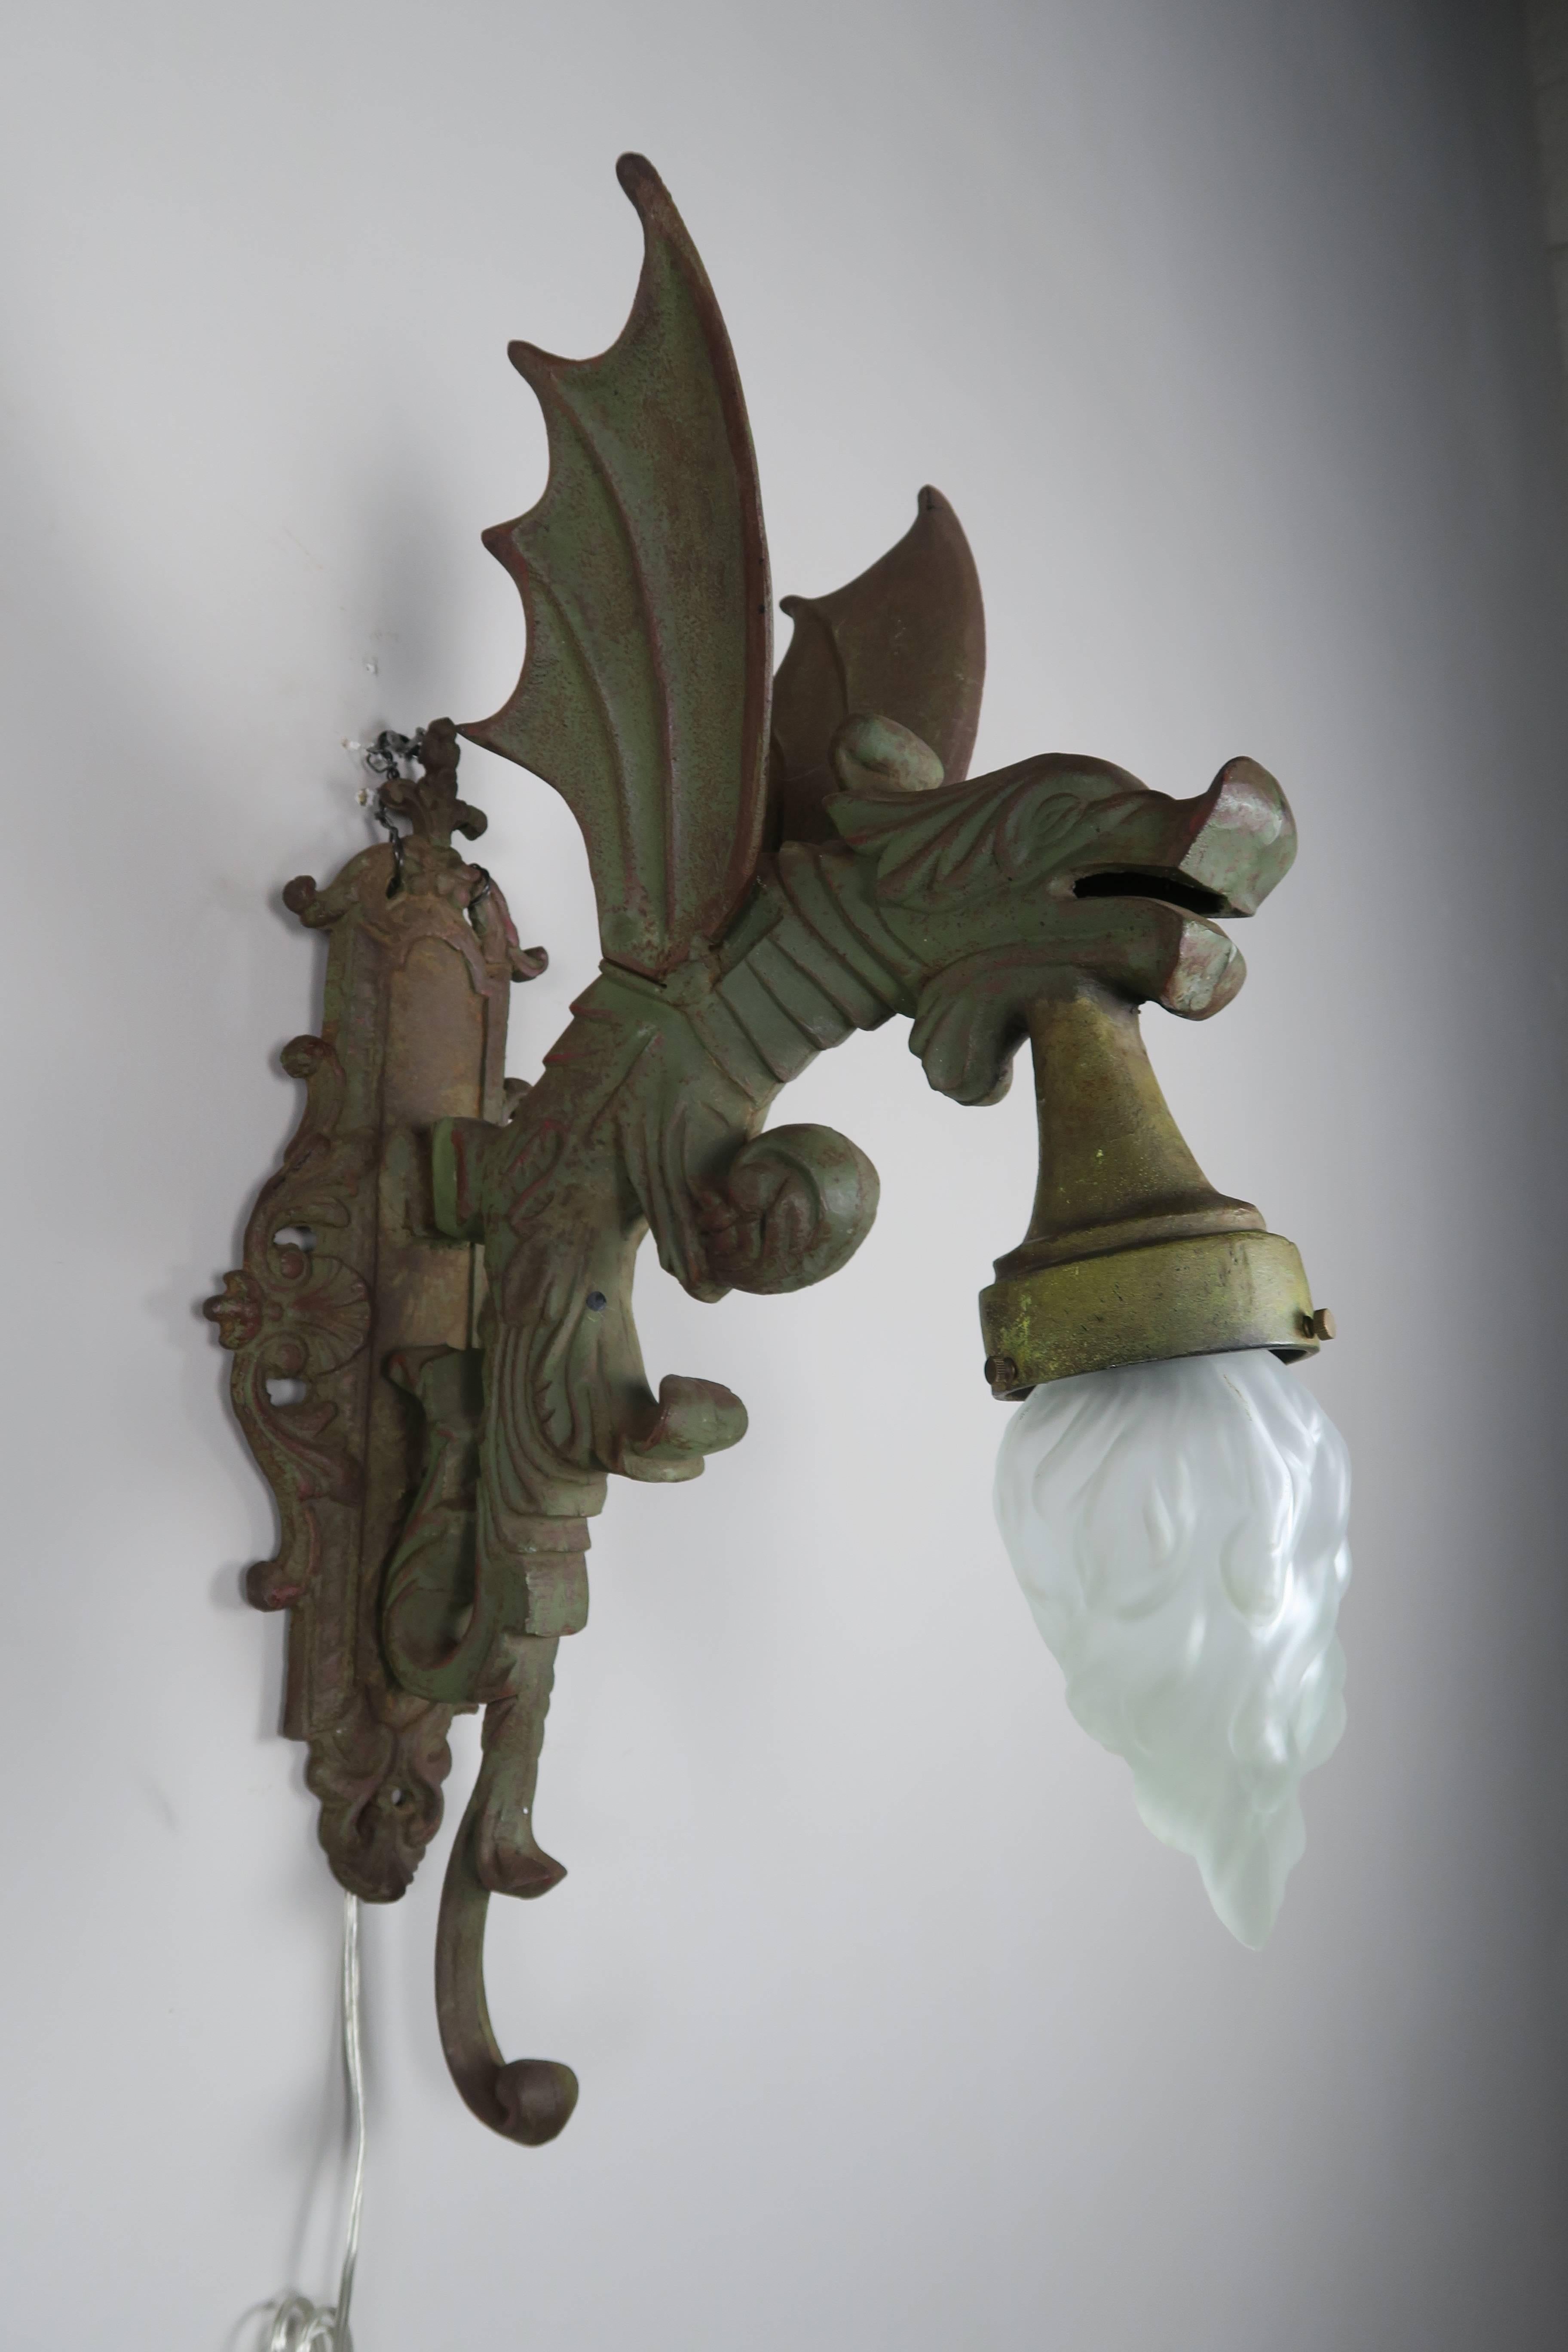 Pair of 1940s green painted French Gothic style dragon sconces with glass flame shaped bulbs. The sconces have been newly wired and are ready to install.